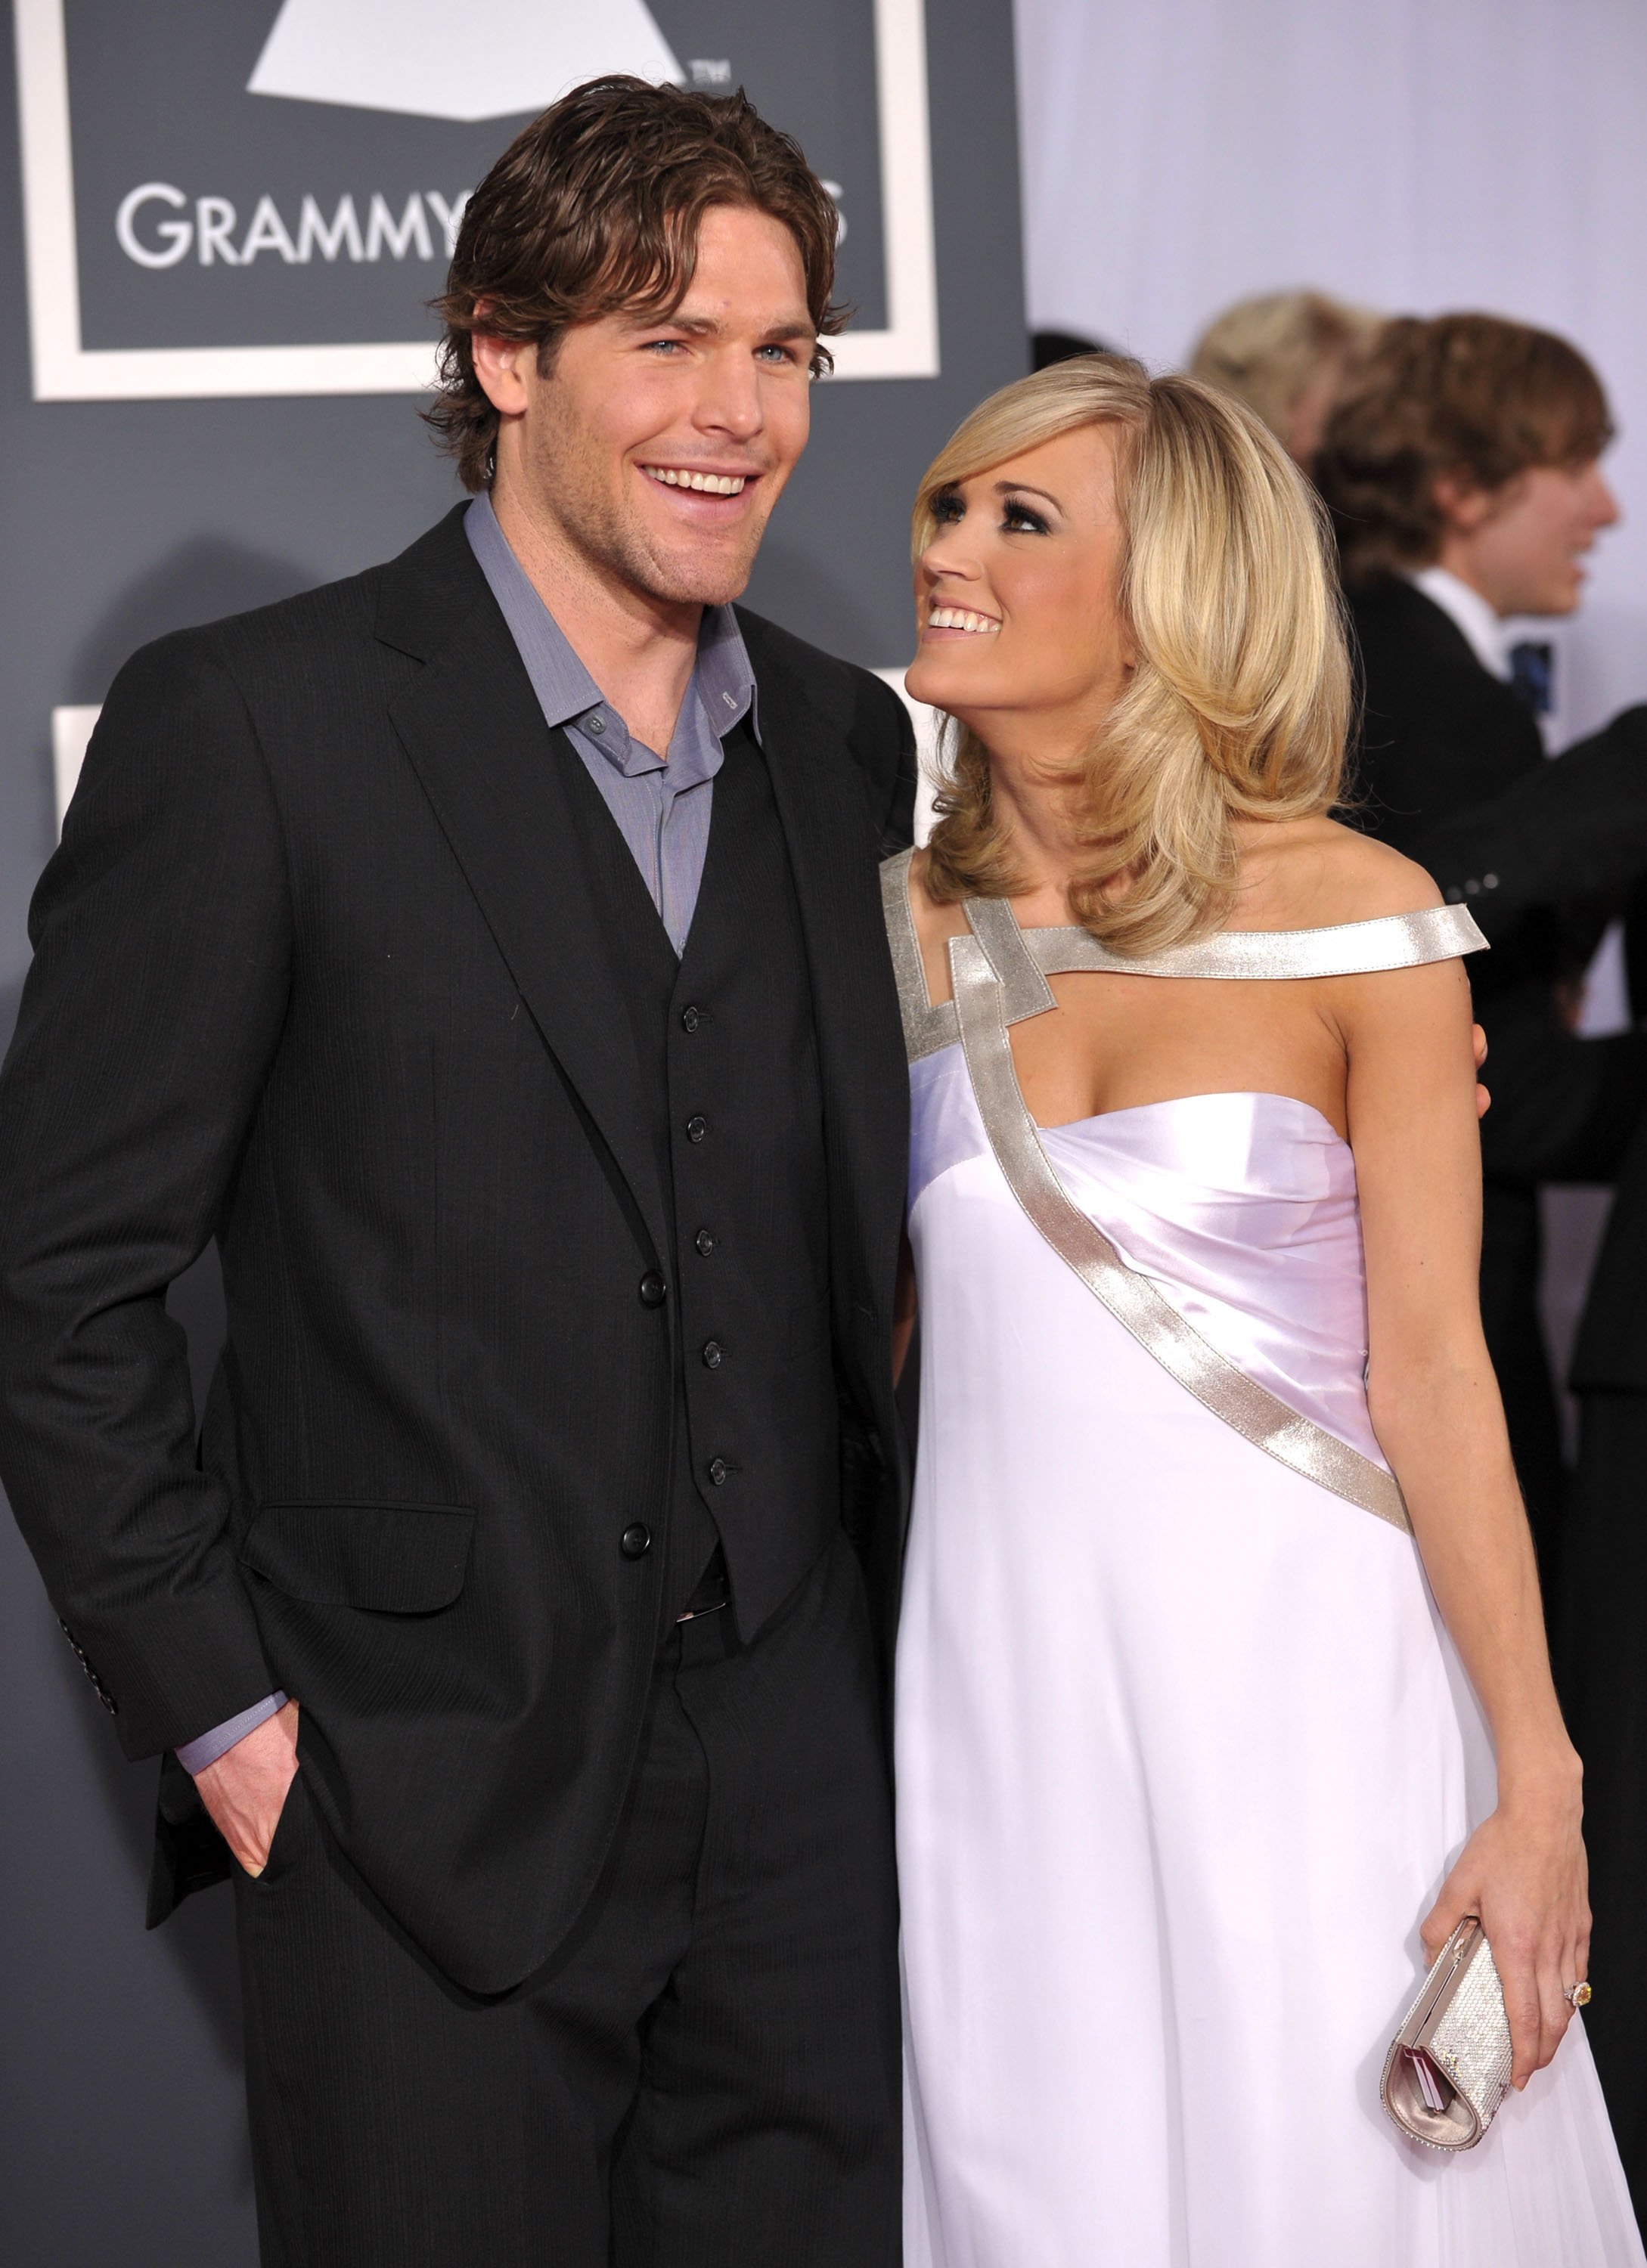 Mike Fisher and Carrie Underwood at the 52nd Annual Grammy Awards on January 31, 2010, in Los Angeles, California. | Source: Getty Images